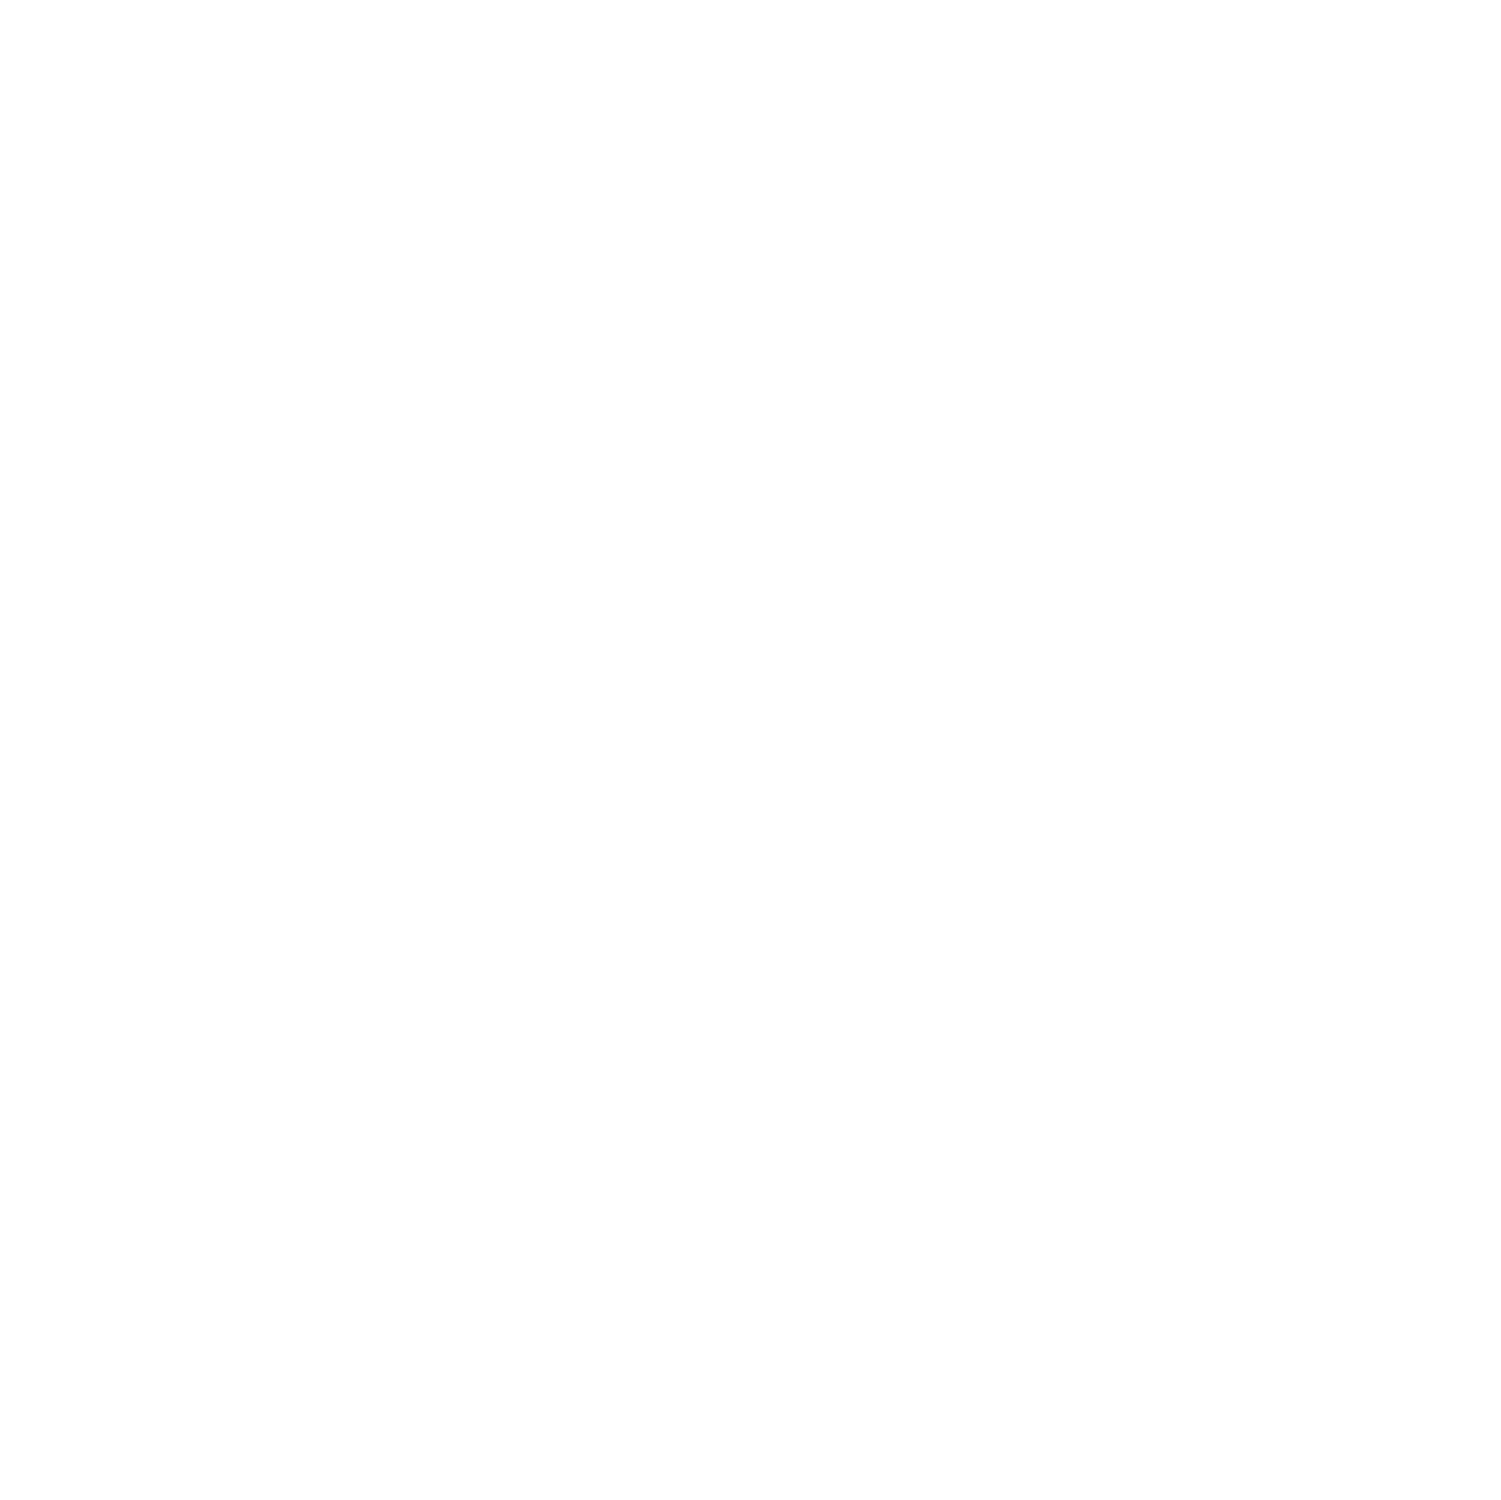 Mitchell County Strong